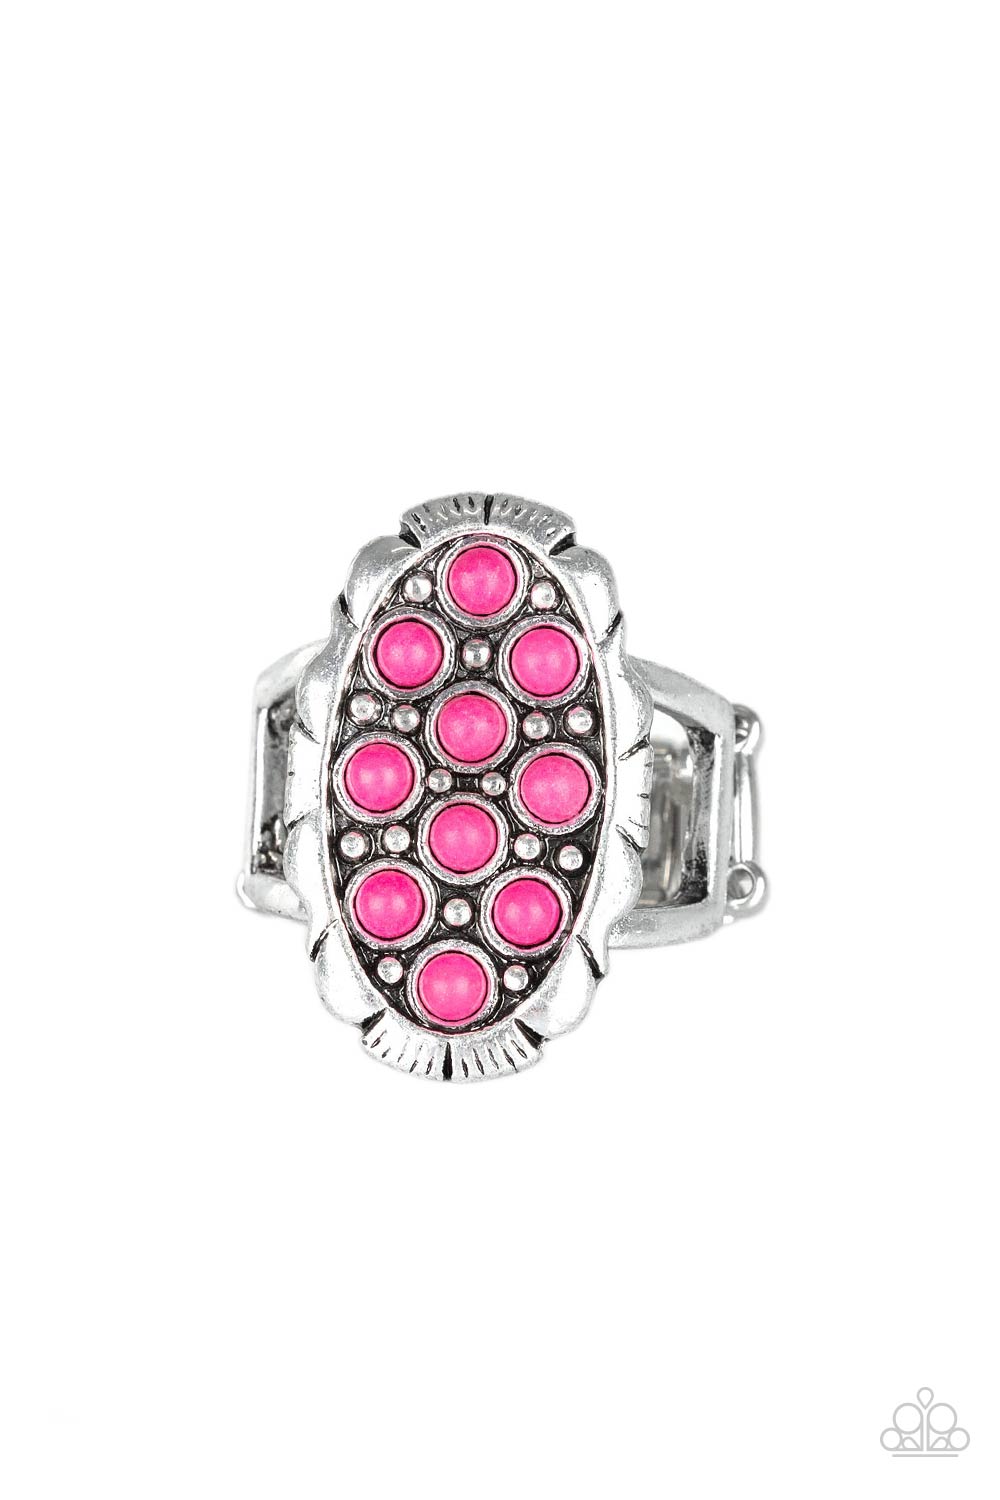 Dainty pink stones are sprinkled across the front of a studded silver frame, creating a vivacious centerpiece atop the finger. Features a stretchy band for a flexible fi